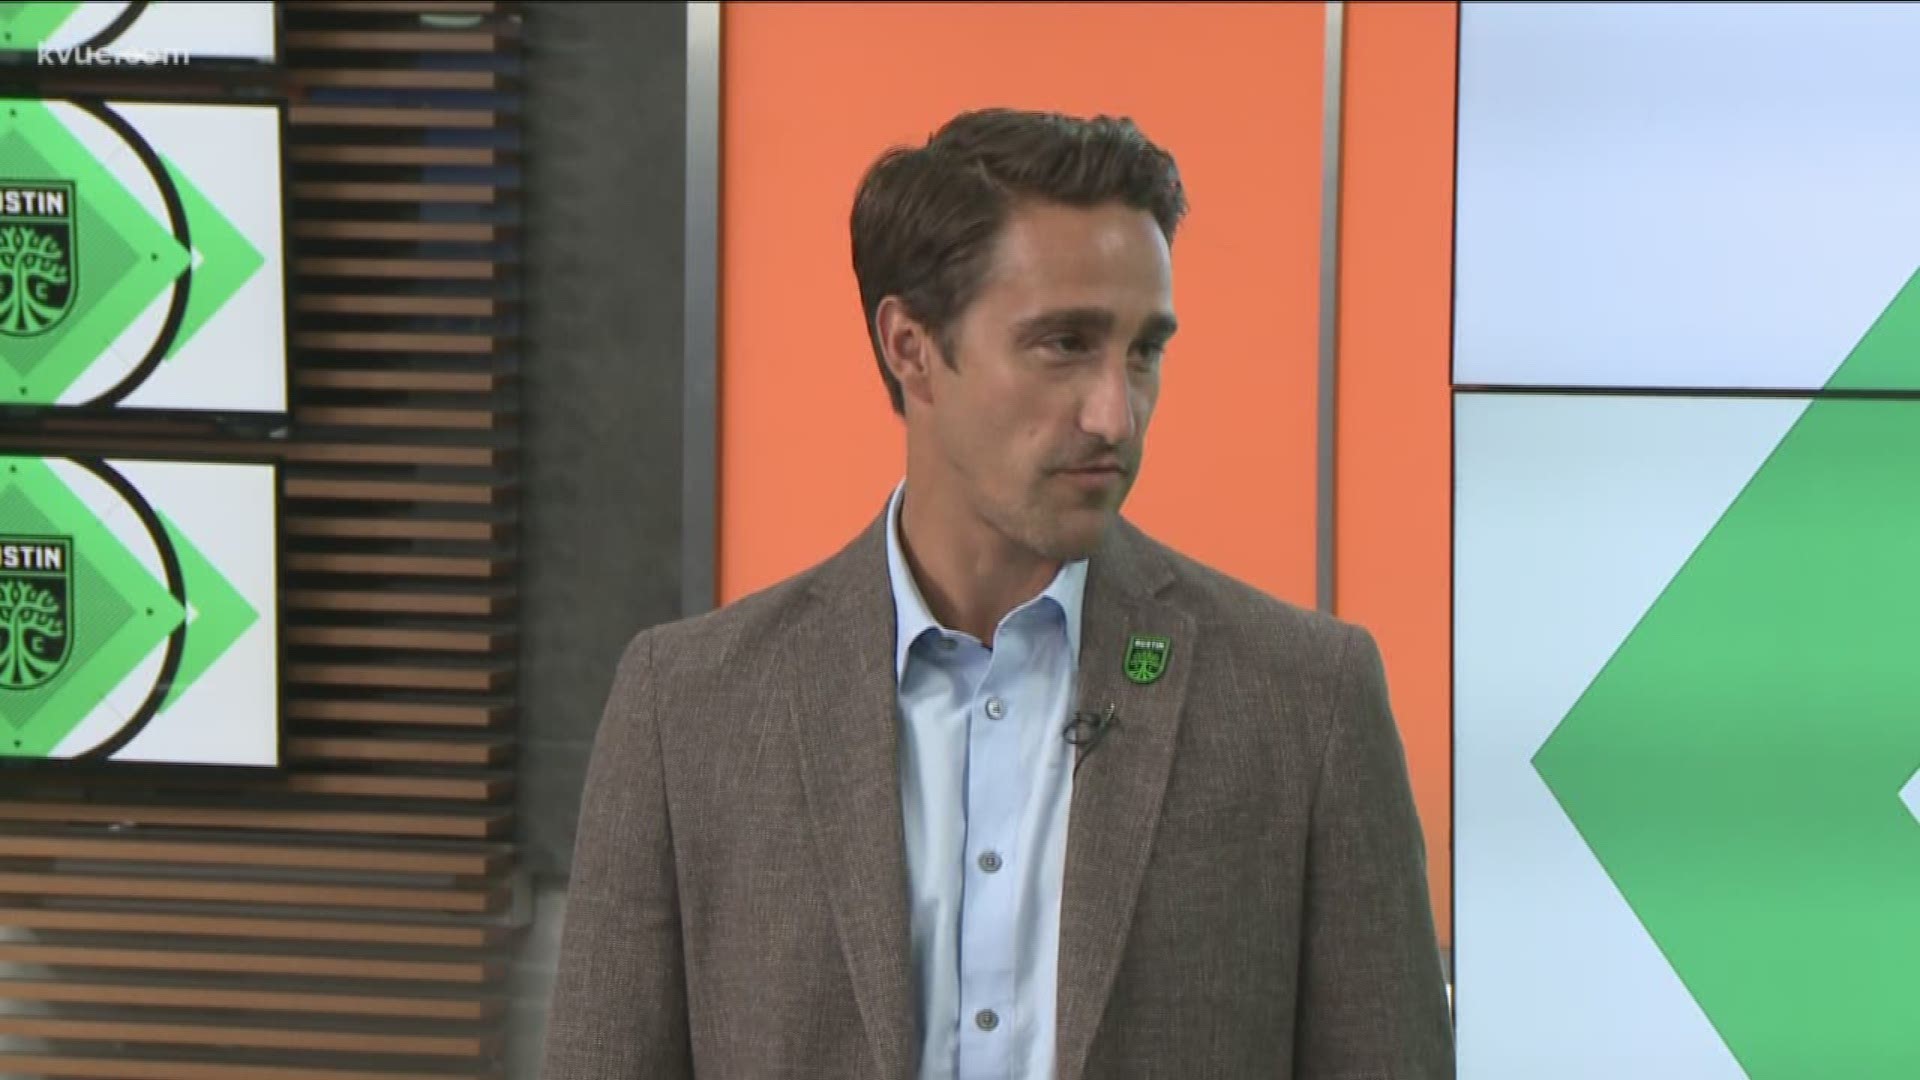 Josh Wolff was officially announced as the first-ever head coach of Austin FC. Wolff stopped by KVUE to discuss his new position.